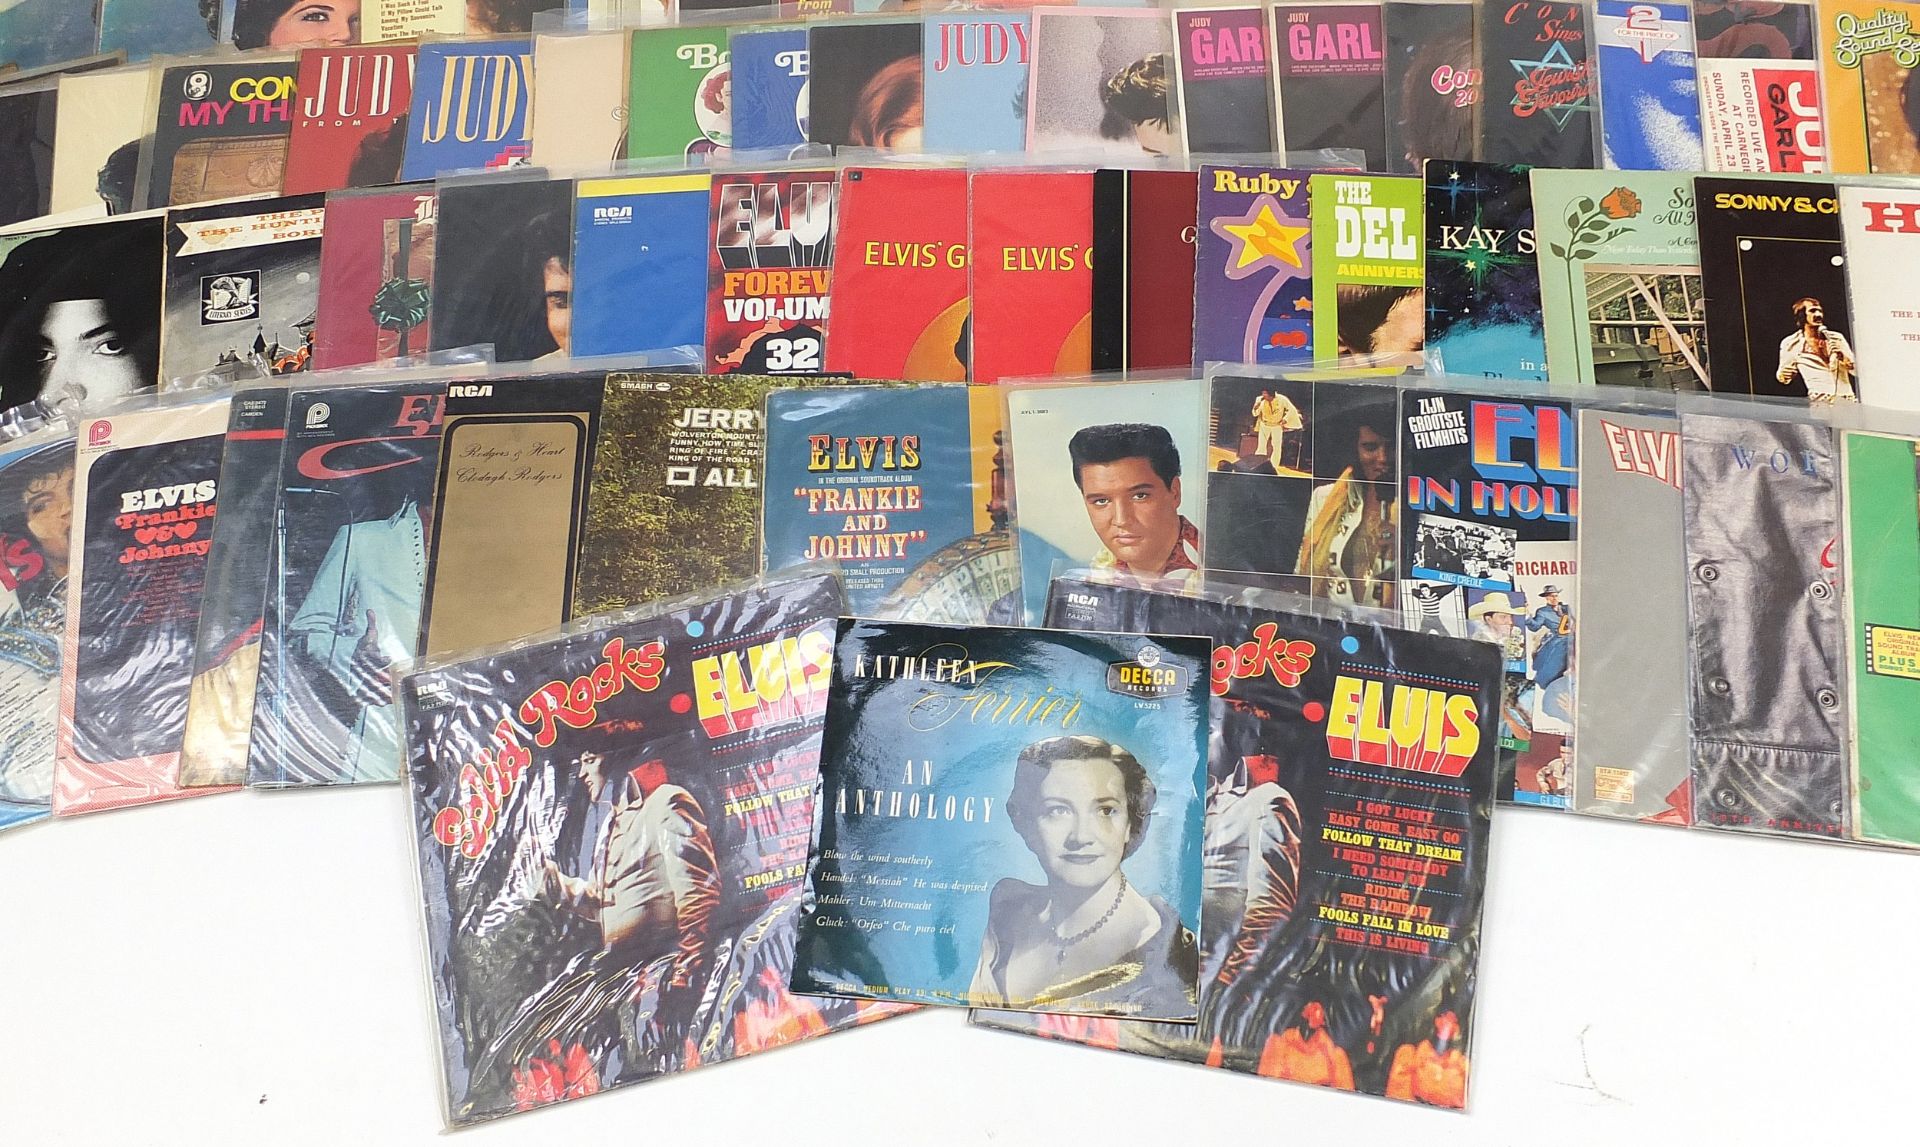 Vinyl LP records including The Damned, Fleetwood Mac, Melanie, Elvis Presley and Connie Francis - Image 6 of 7